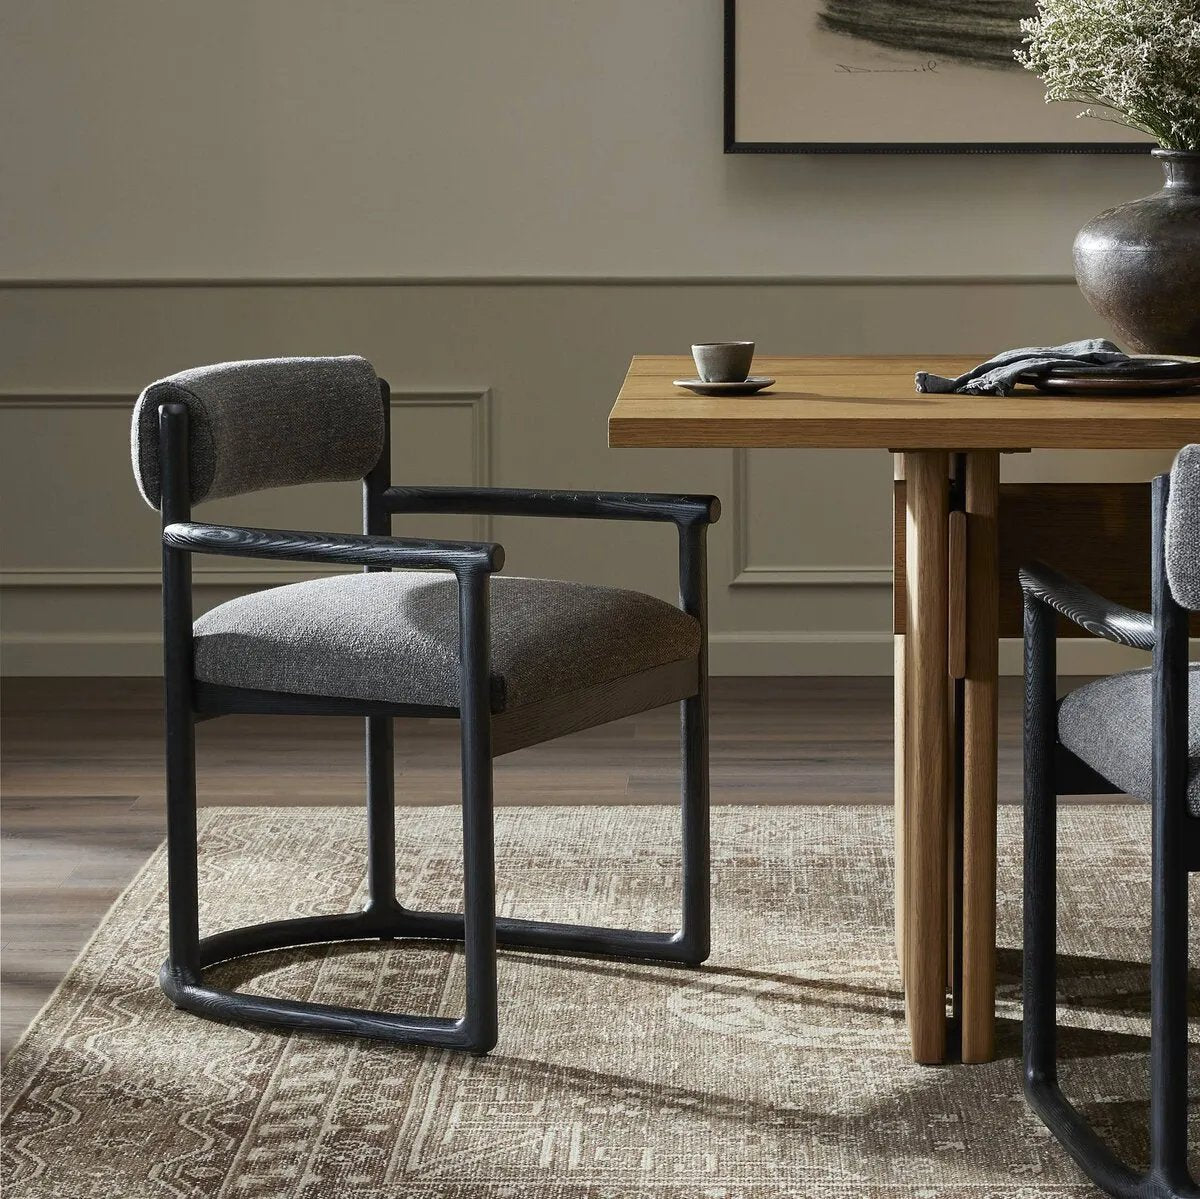 This Clarice Thames Ash Dining Chair is a versatile and stylish addition to your dining space. Its high-quality construction and sleek design provide comfort and elegance Amethyst Home provides interior design, new home construction design consulting, vintage area rugs, and lighting in the Charlotte metro area.